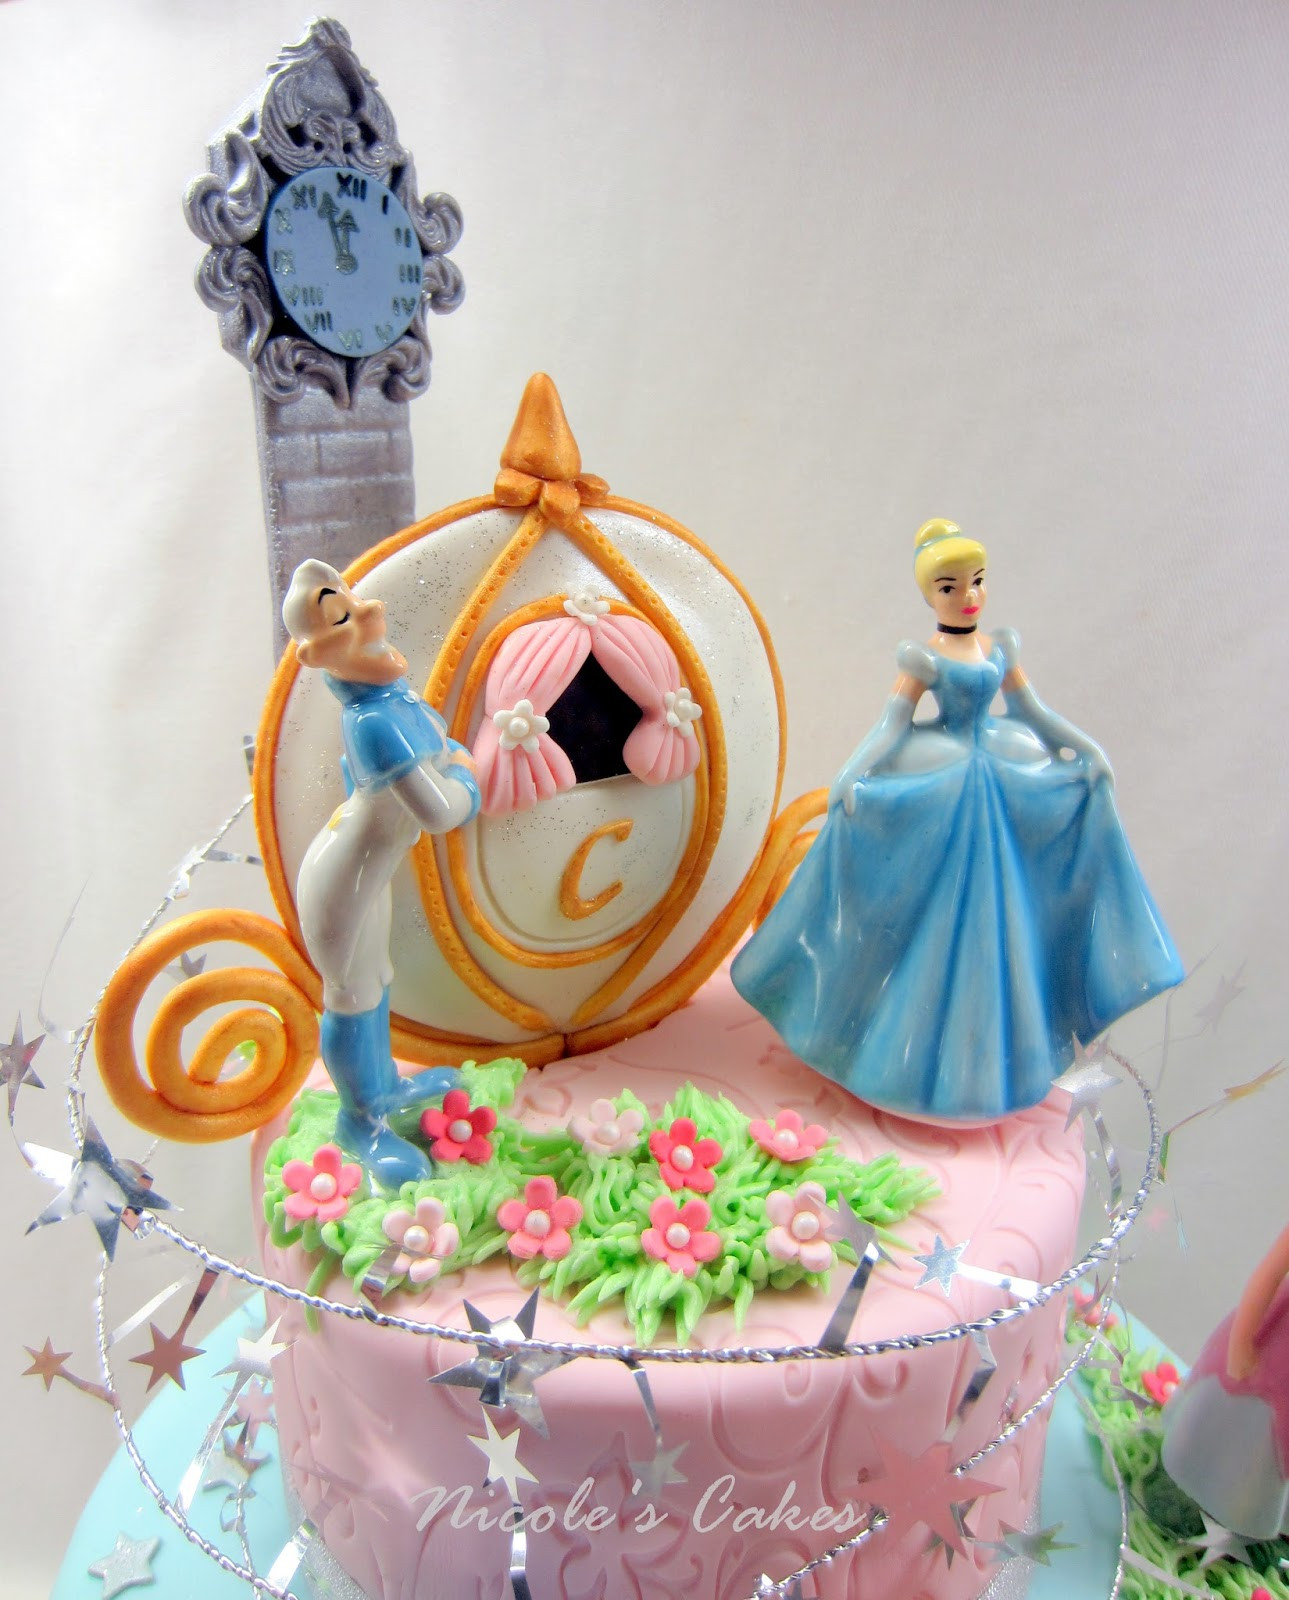 Cinderella Birthday Cakes
 Confections Cakes & Creations The Cinderella Story